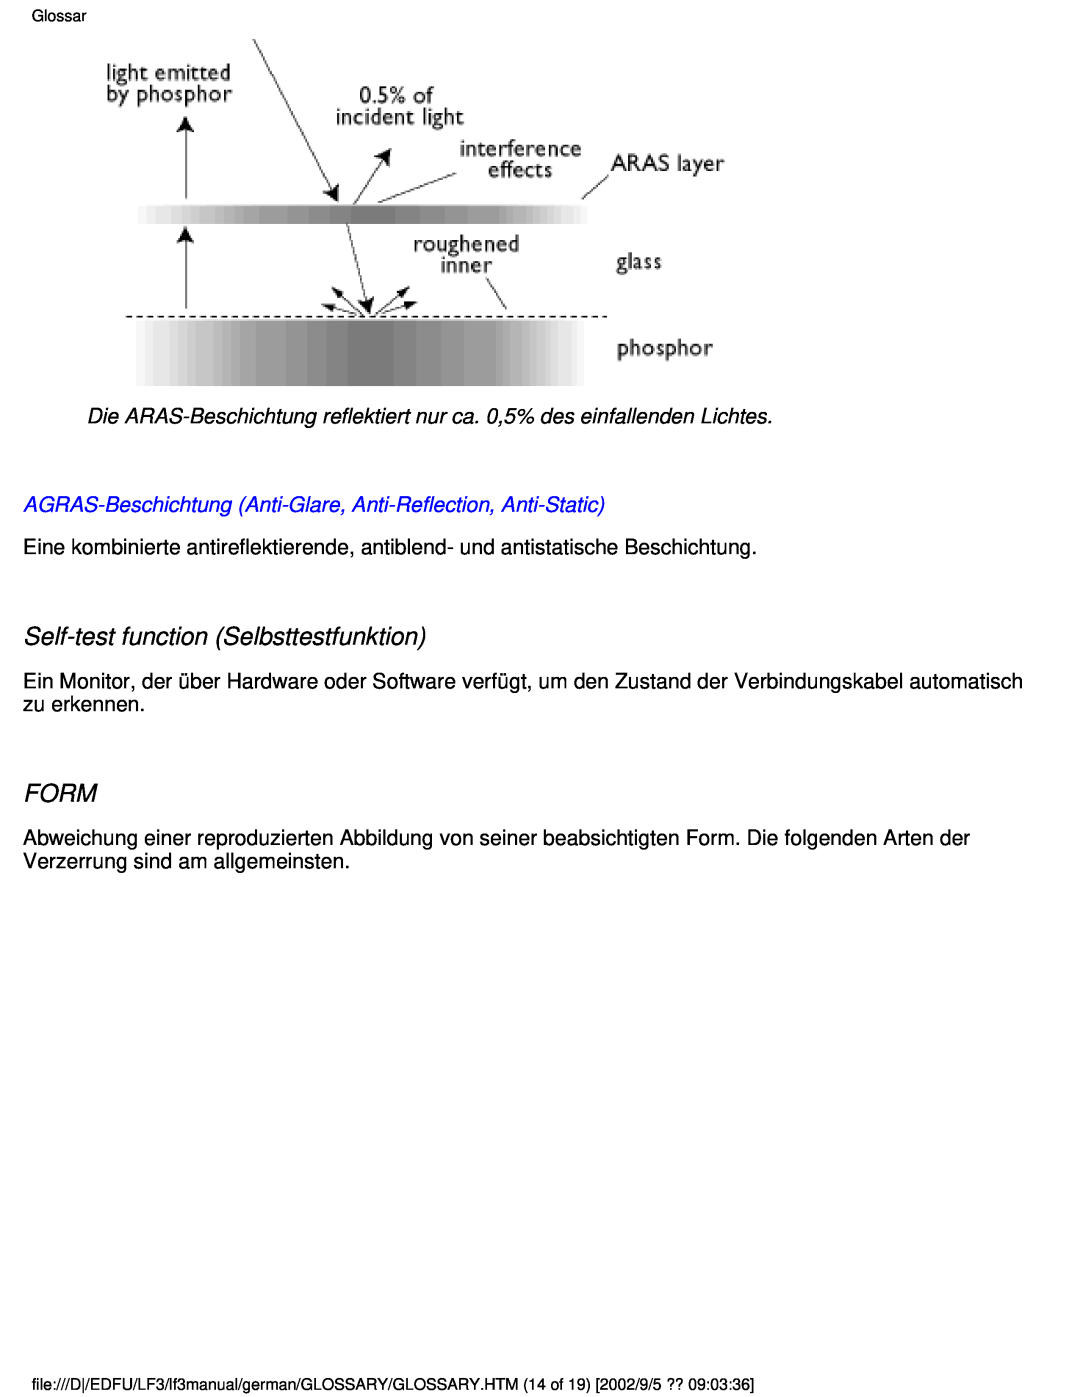 Philips 107E Self-test function Selbsttestfunktion, Form, AGRAS-Beschichtung Anti-Glare, Anti-Reflection, Anti-Static 